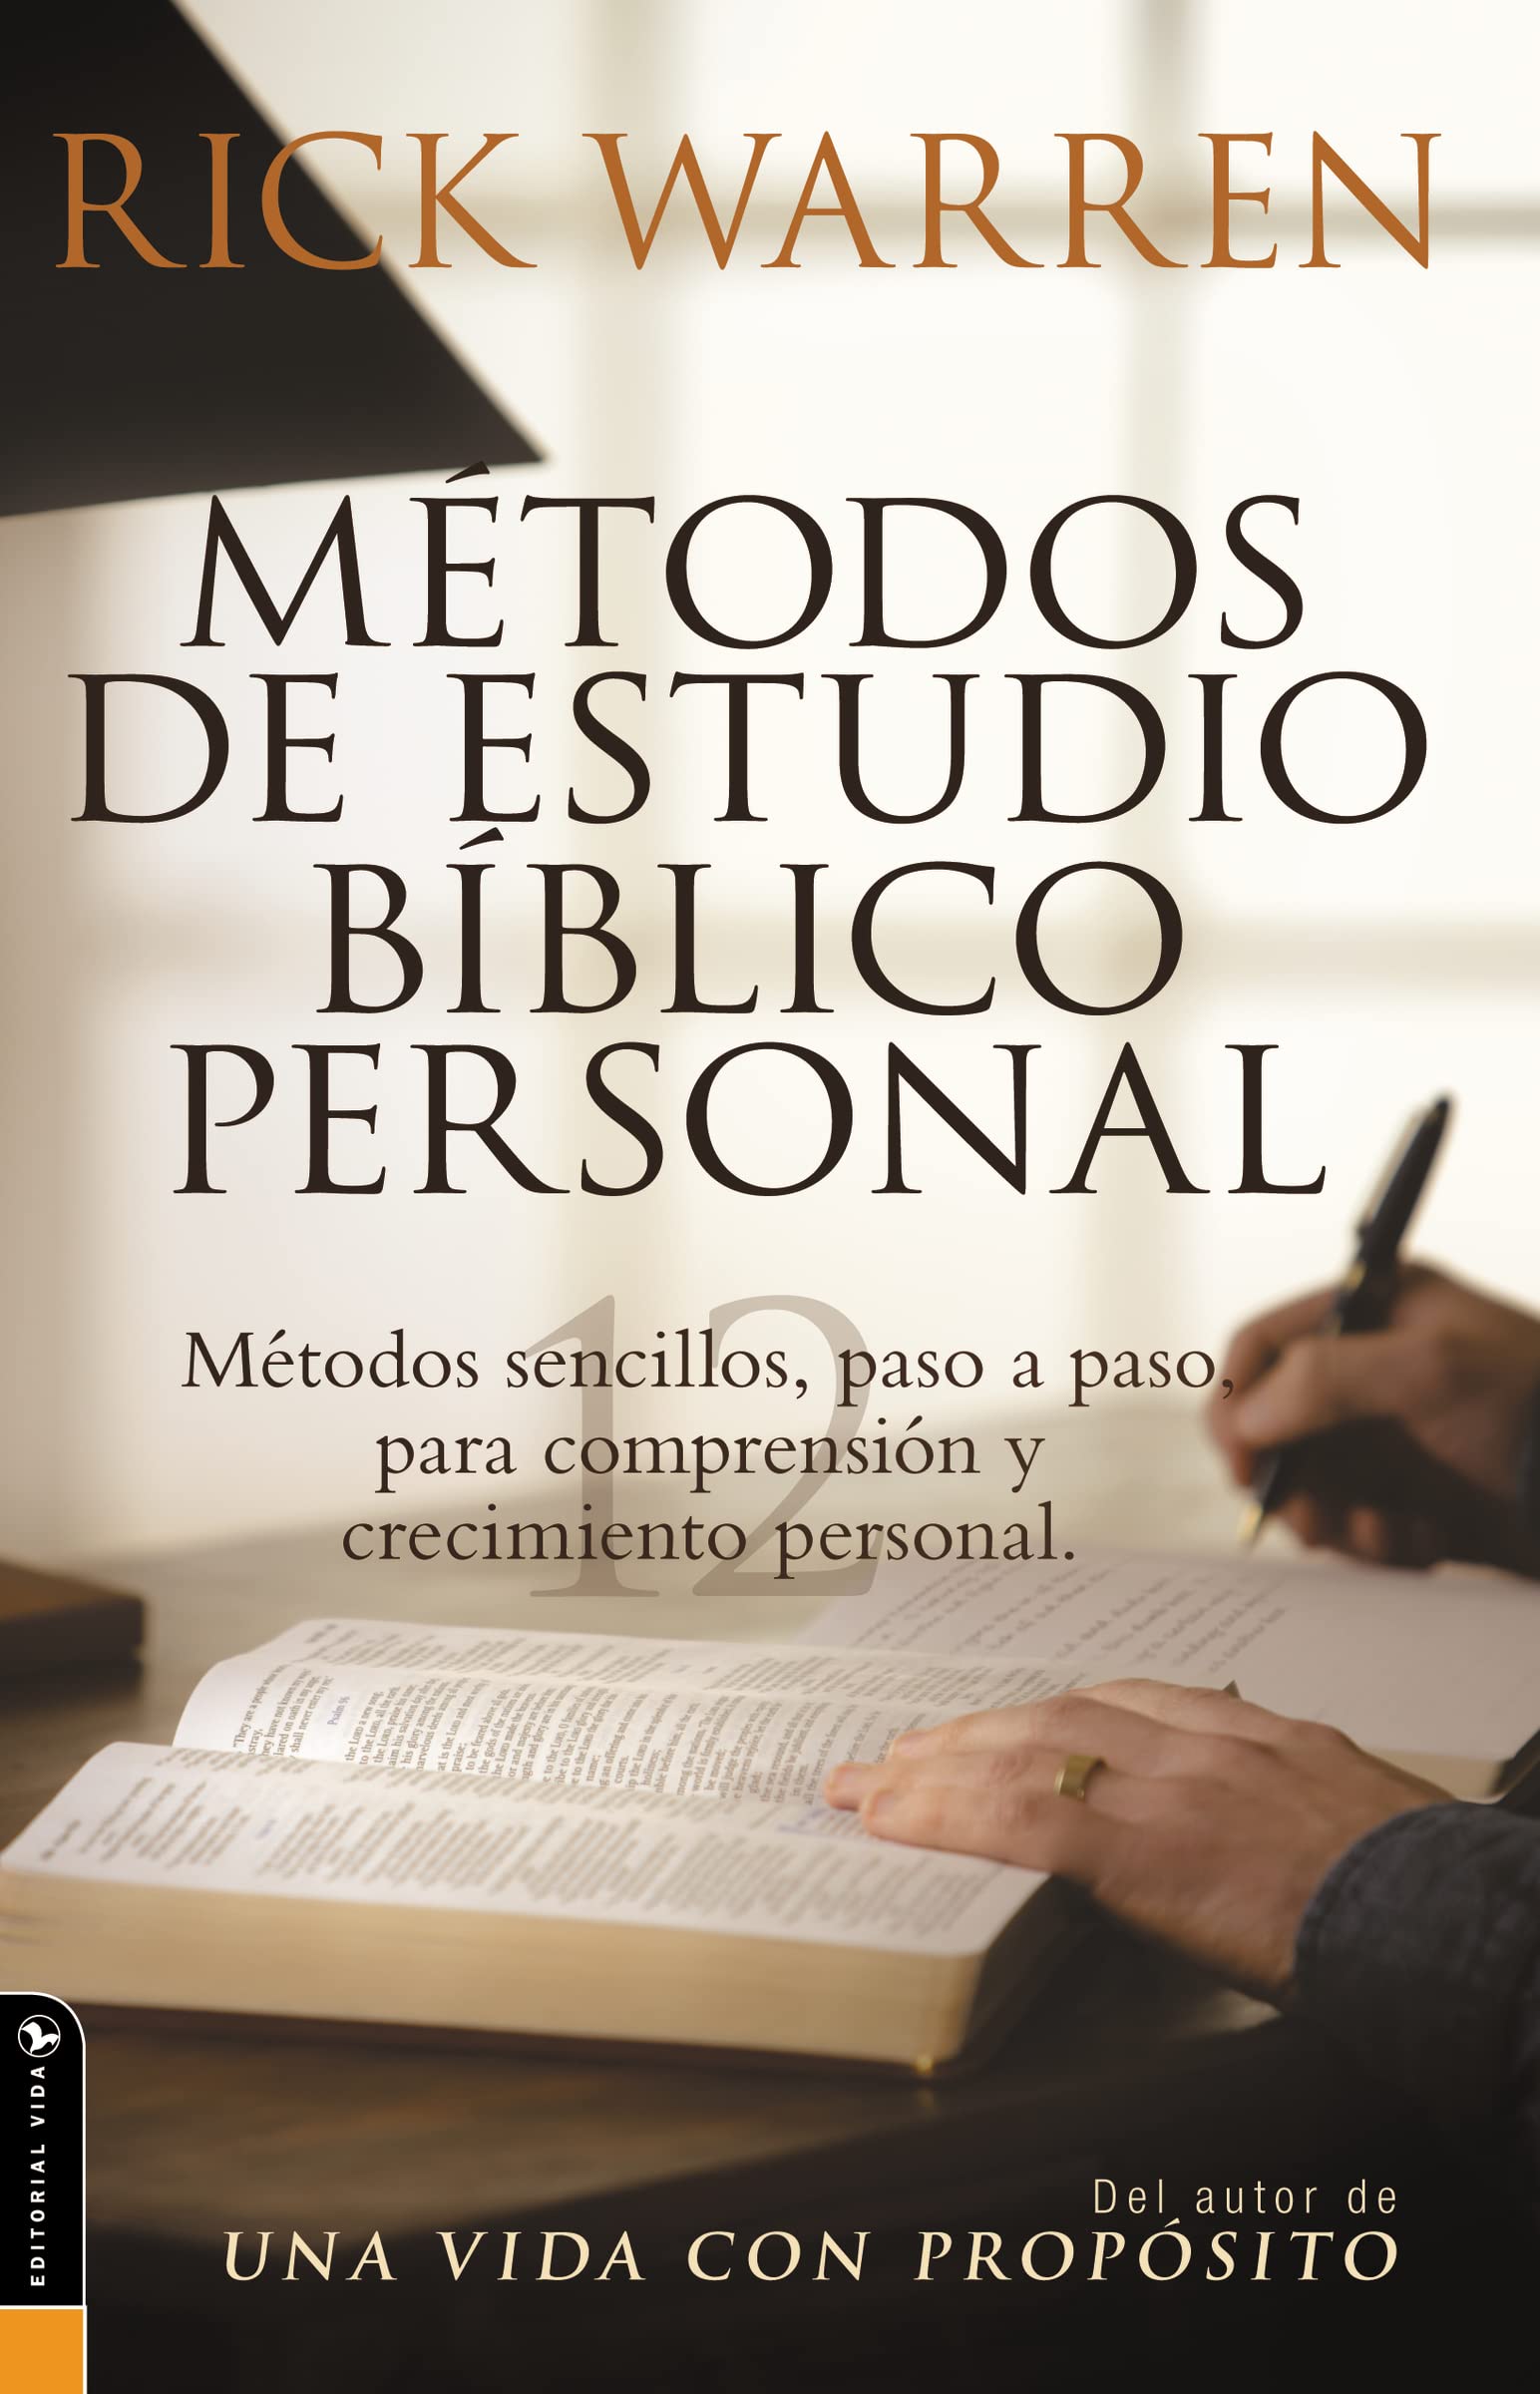 Metodos De Estudio Biblico Personal (Personal Bible Study Methods: 12 ways to study the Bible on your own) (Spanish Edition)